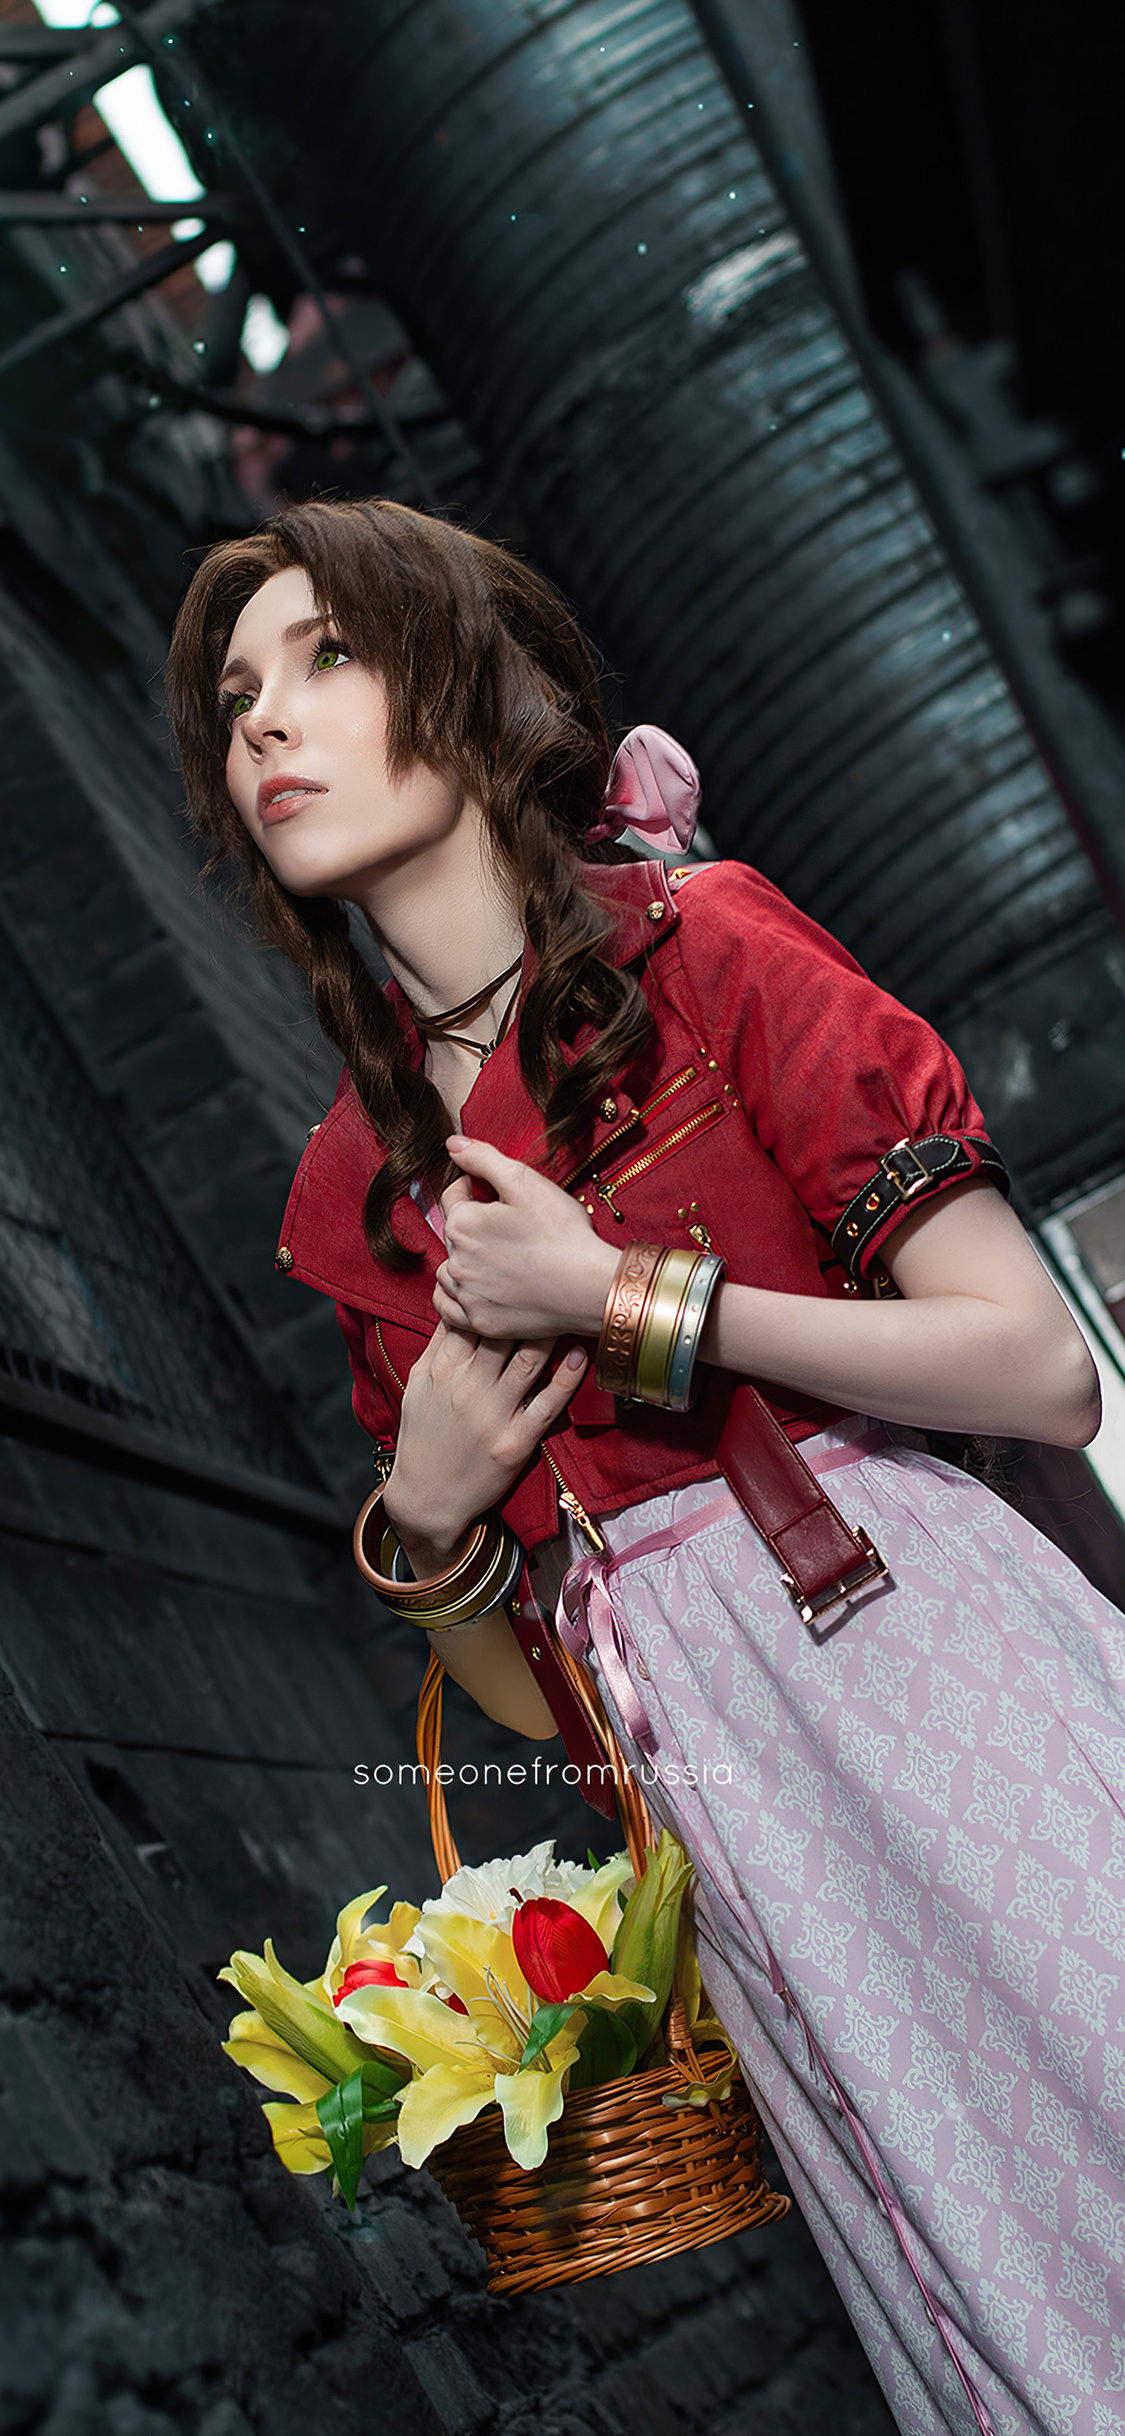 X aerith gainsborough final fantasy cosplay k iphone xsiphone iphone x hd k wallpapers images backgrounds photos and pictures